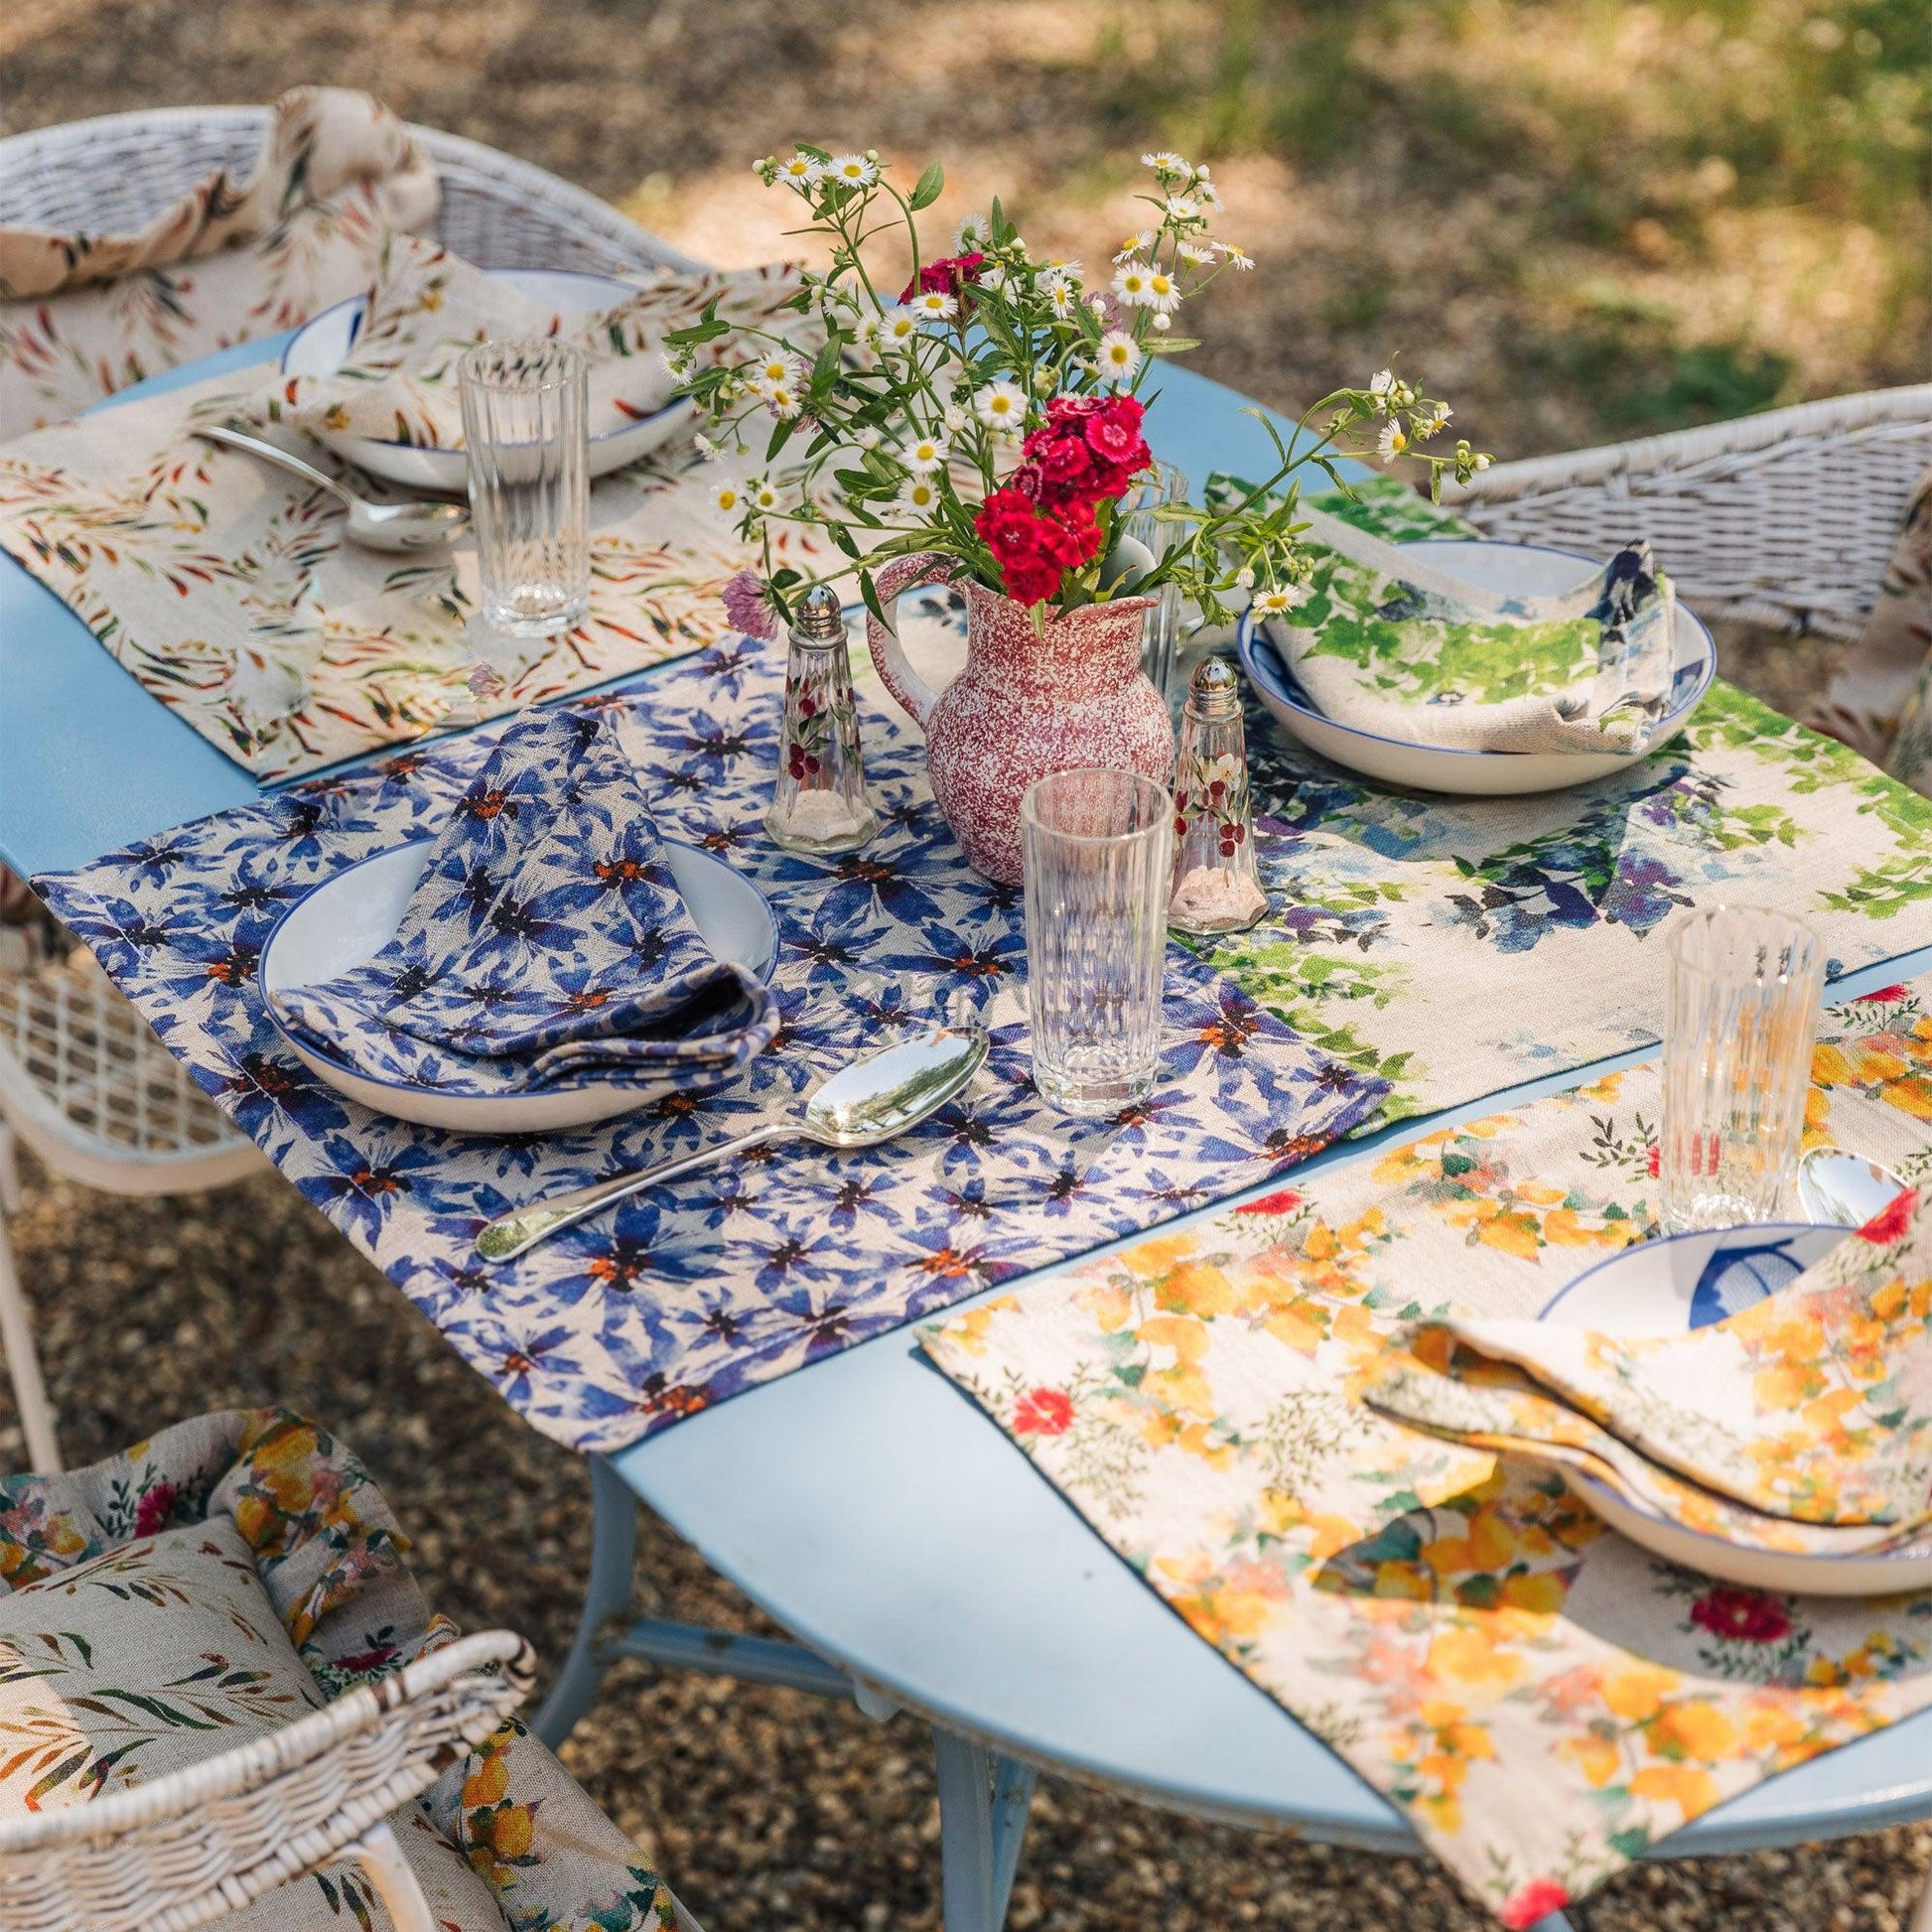 Outdoor table setting with floral napkins and placemats made of organic linen.